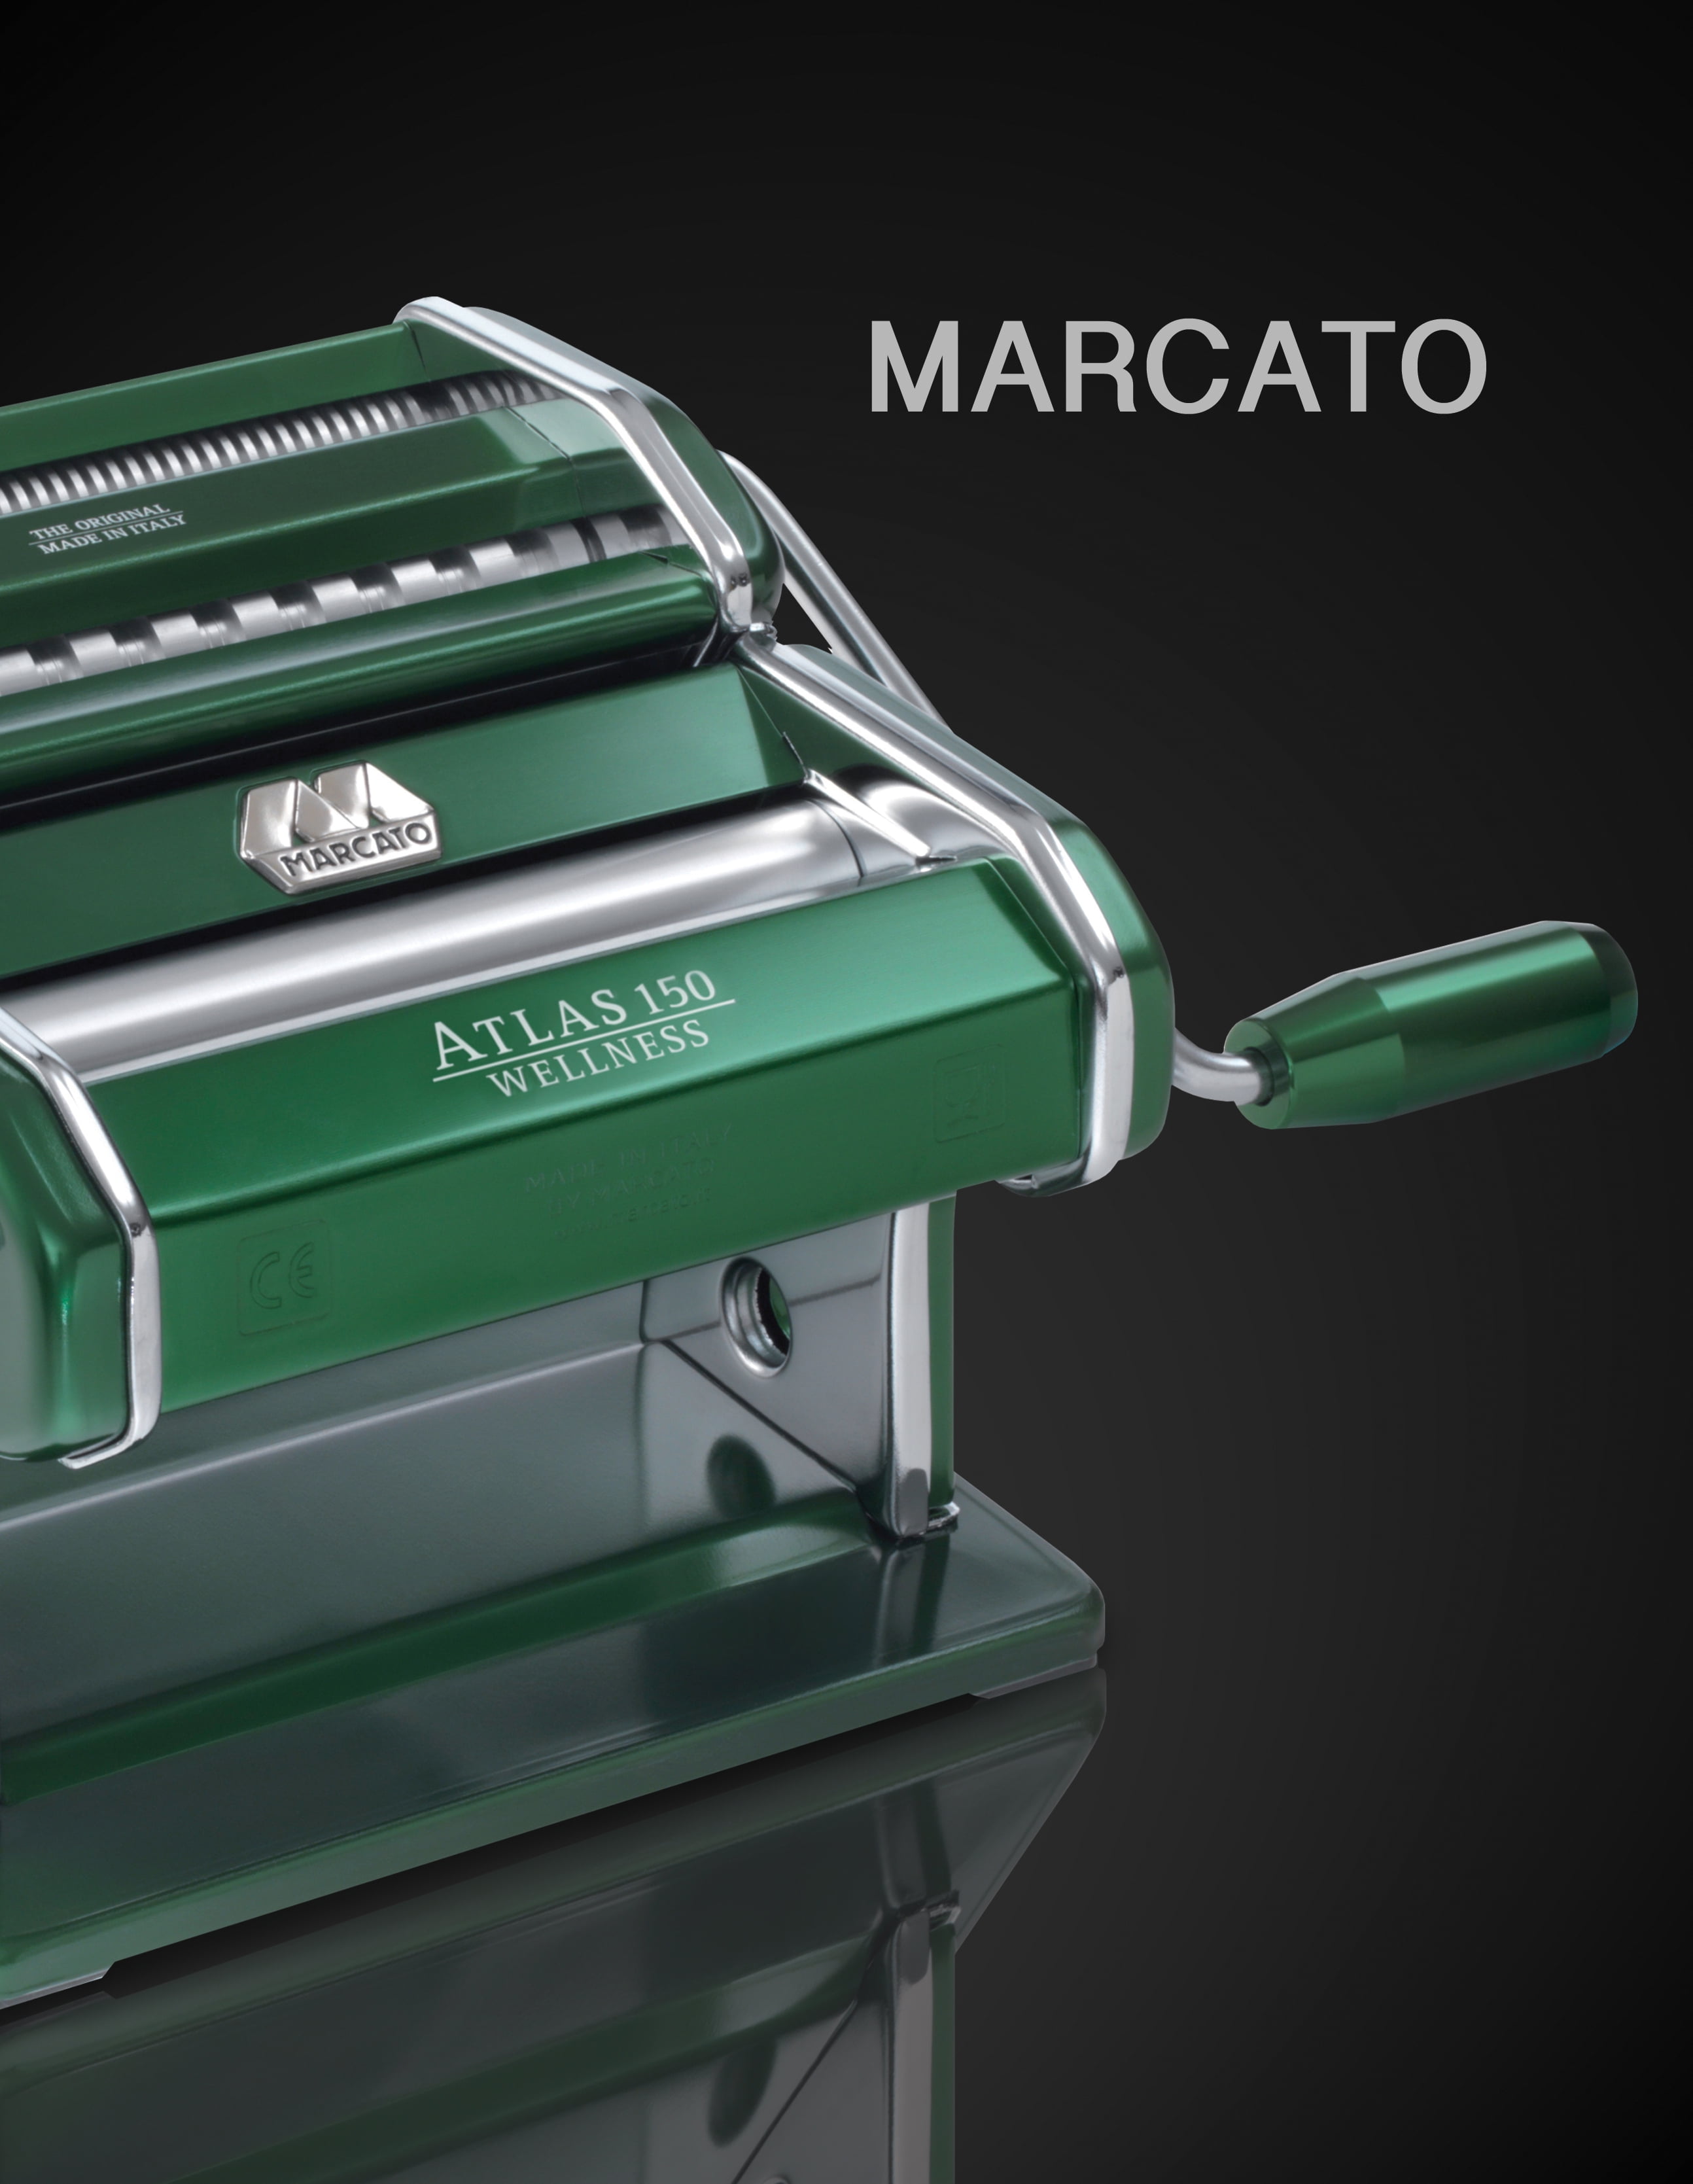 Marcato Atlas 150 Pasta Machine, Made in Italy, Red, Includes Pasta Cutter,  Hand Crank, and Instructions 